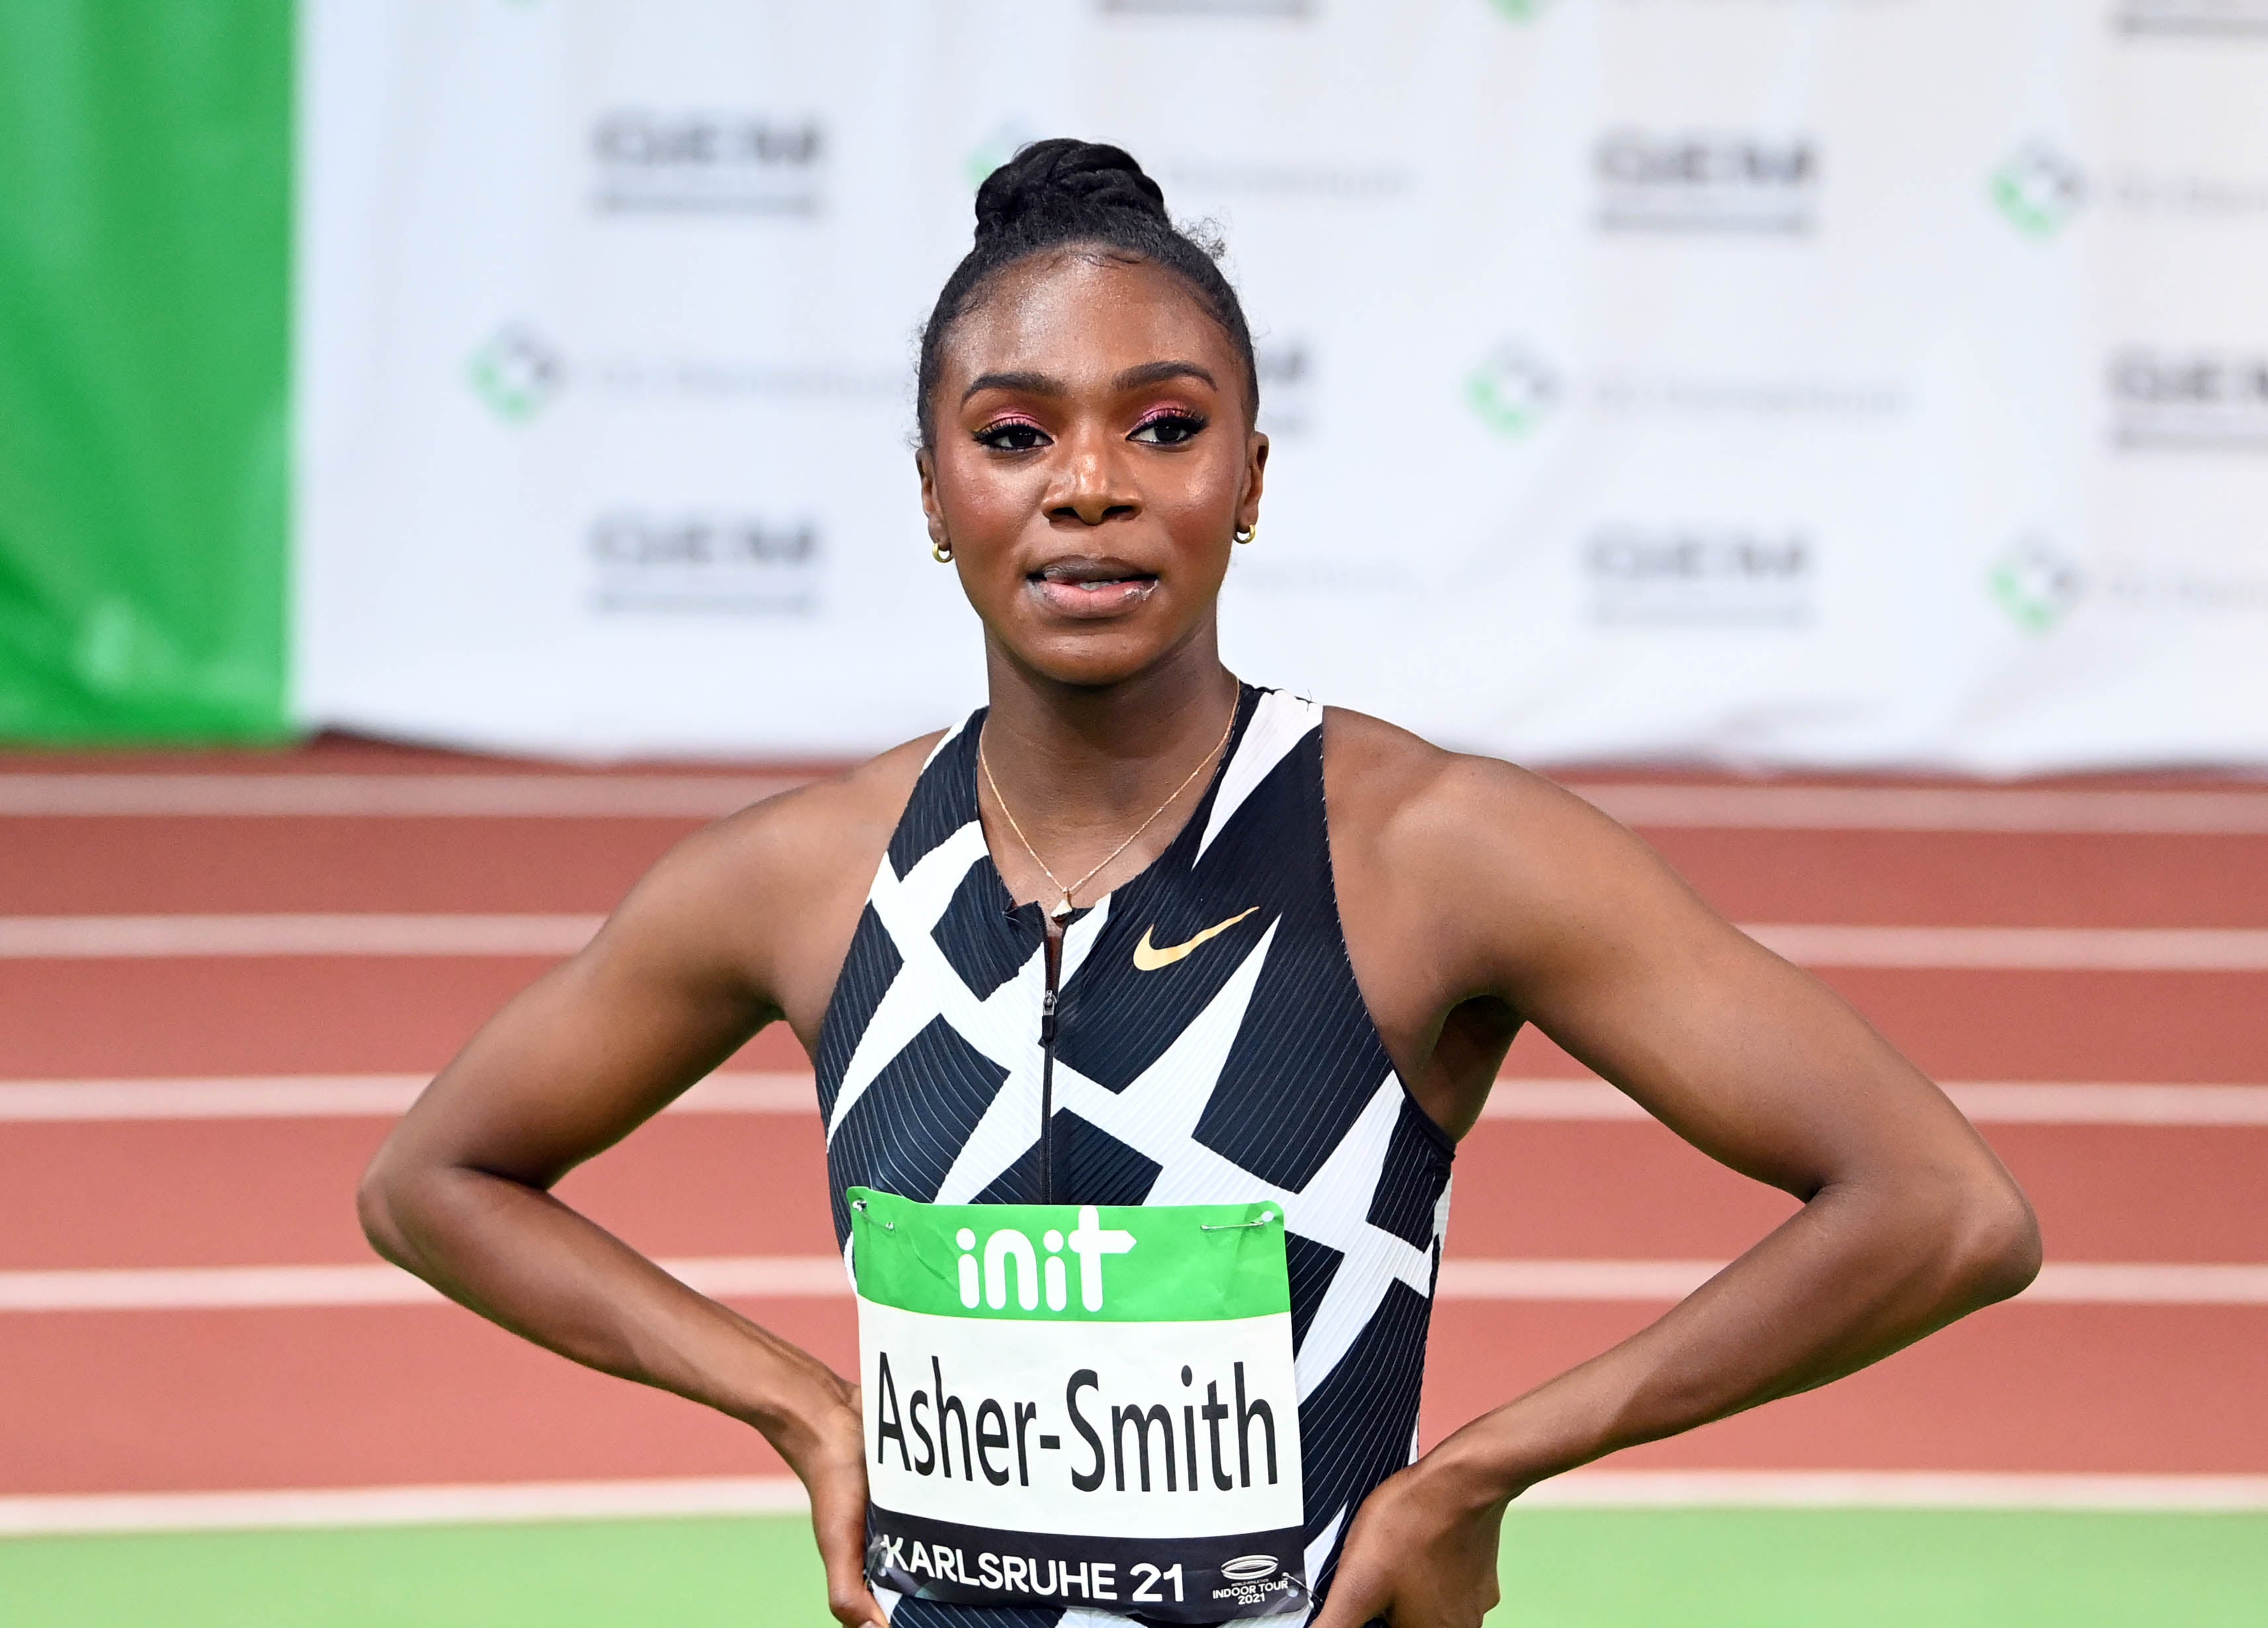 Dina Asher-Smith has called on the sports industry to focus less on aesthetics when promoting women’s sport